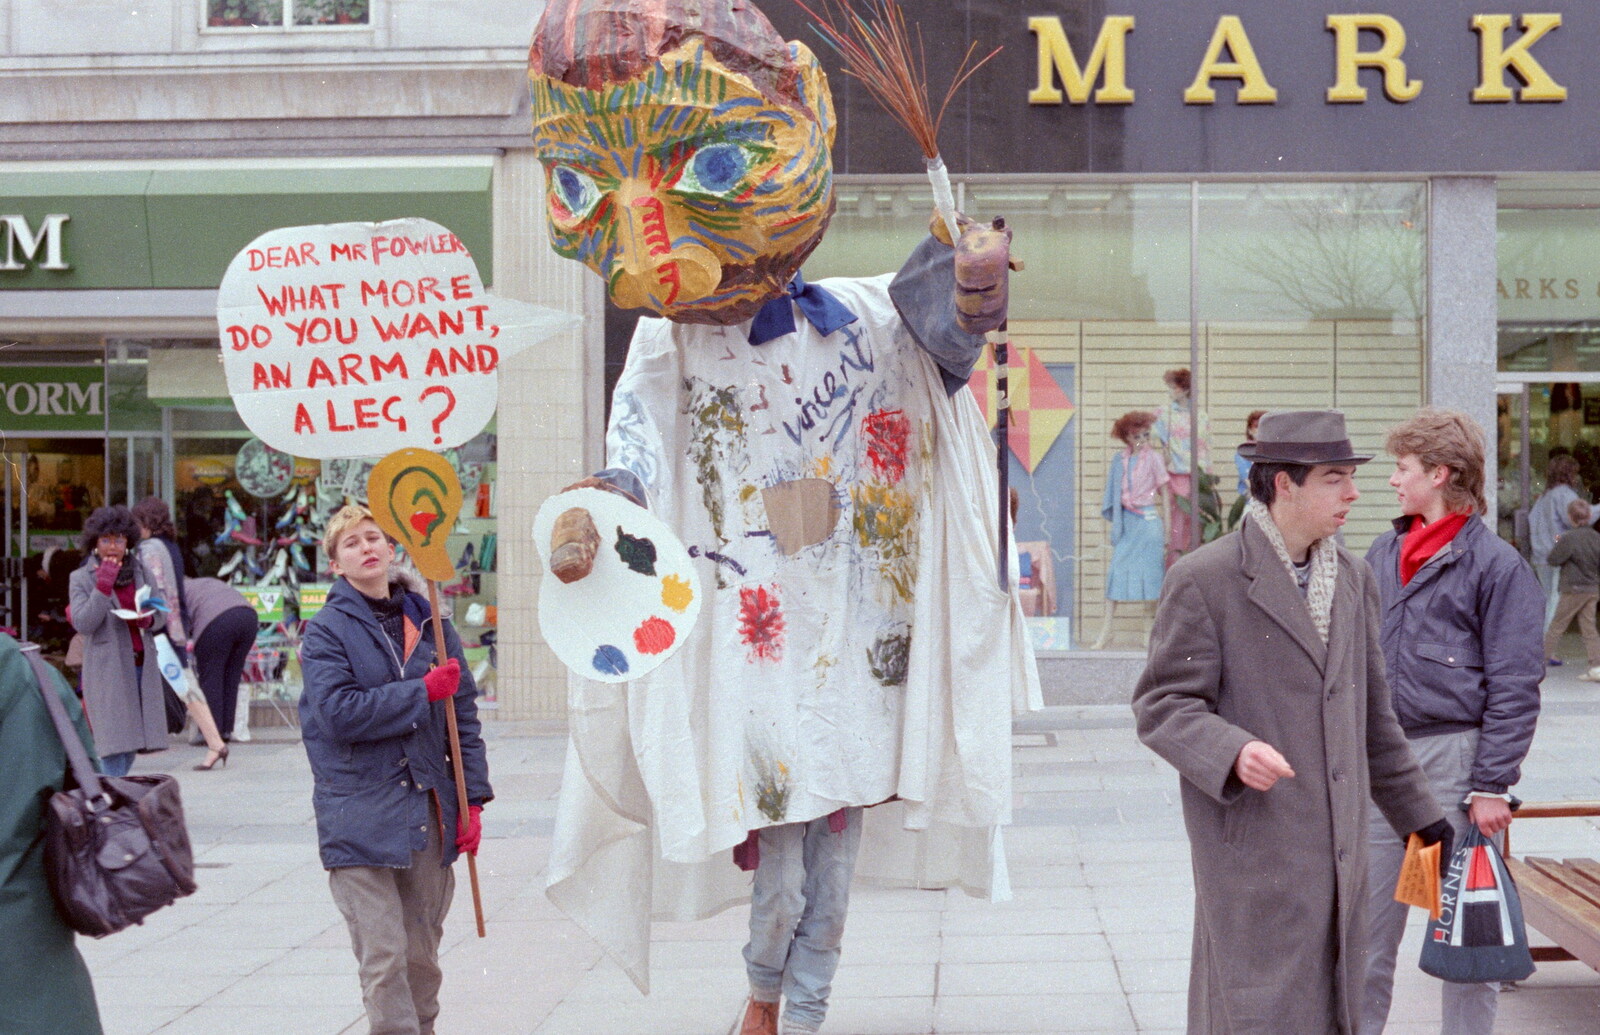 Vincent outside Marks and Spencer from Uni: A Van Gogh Grant Cuts Protest, Plymouth, Devon - 1st March 1986